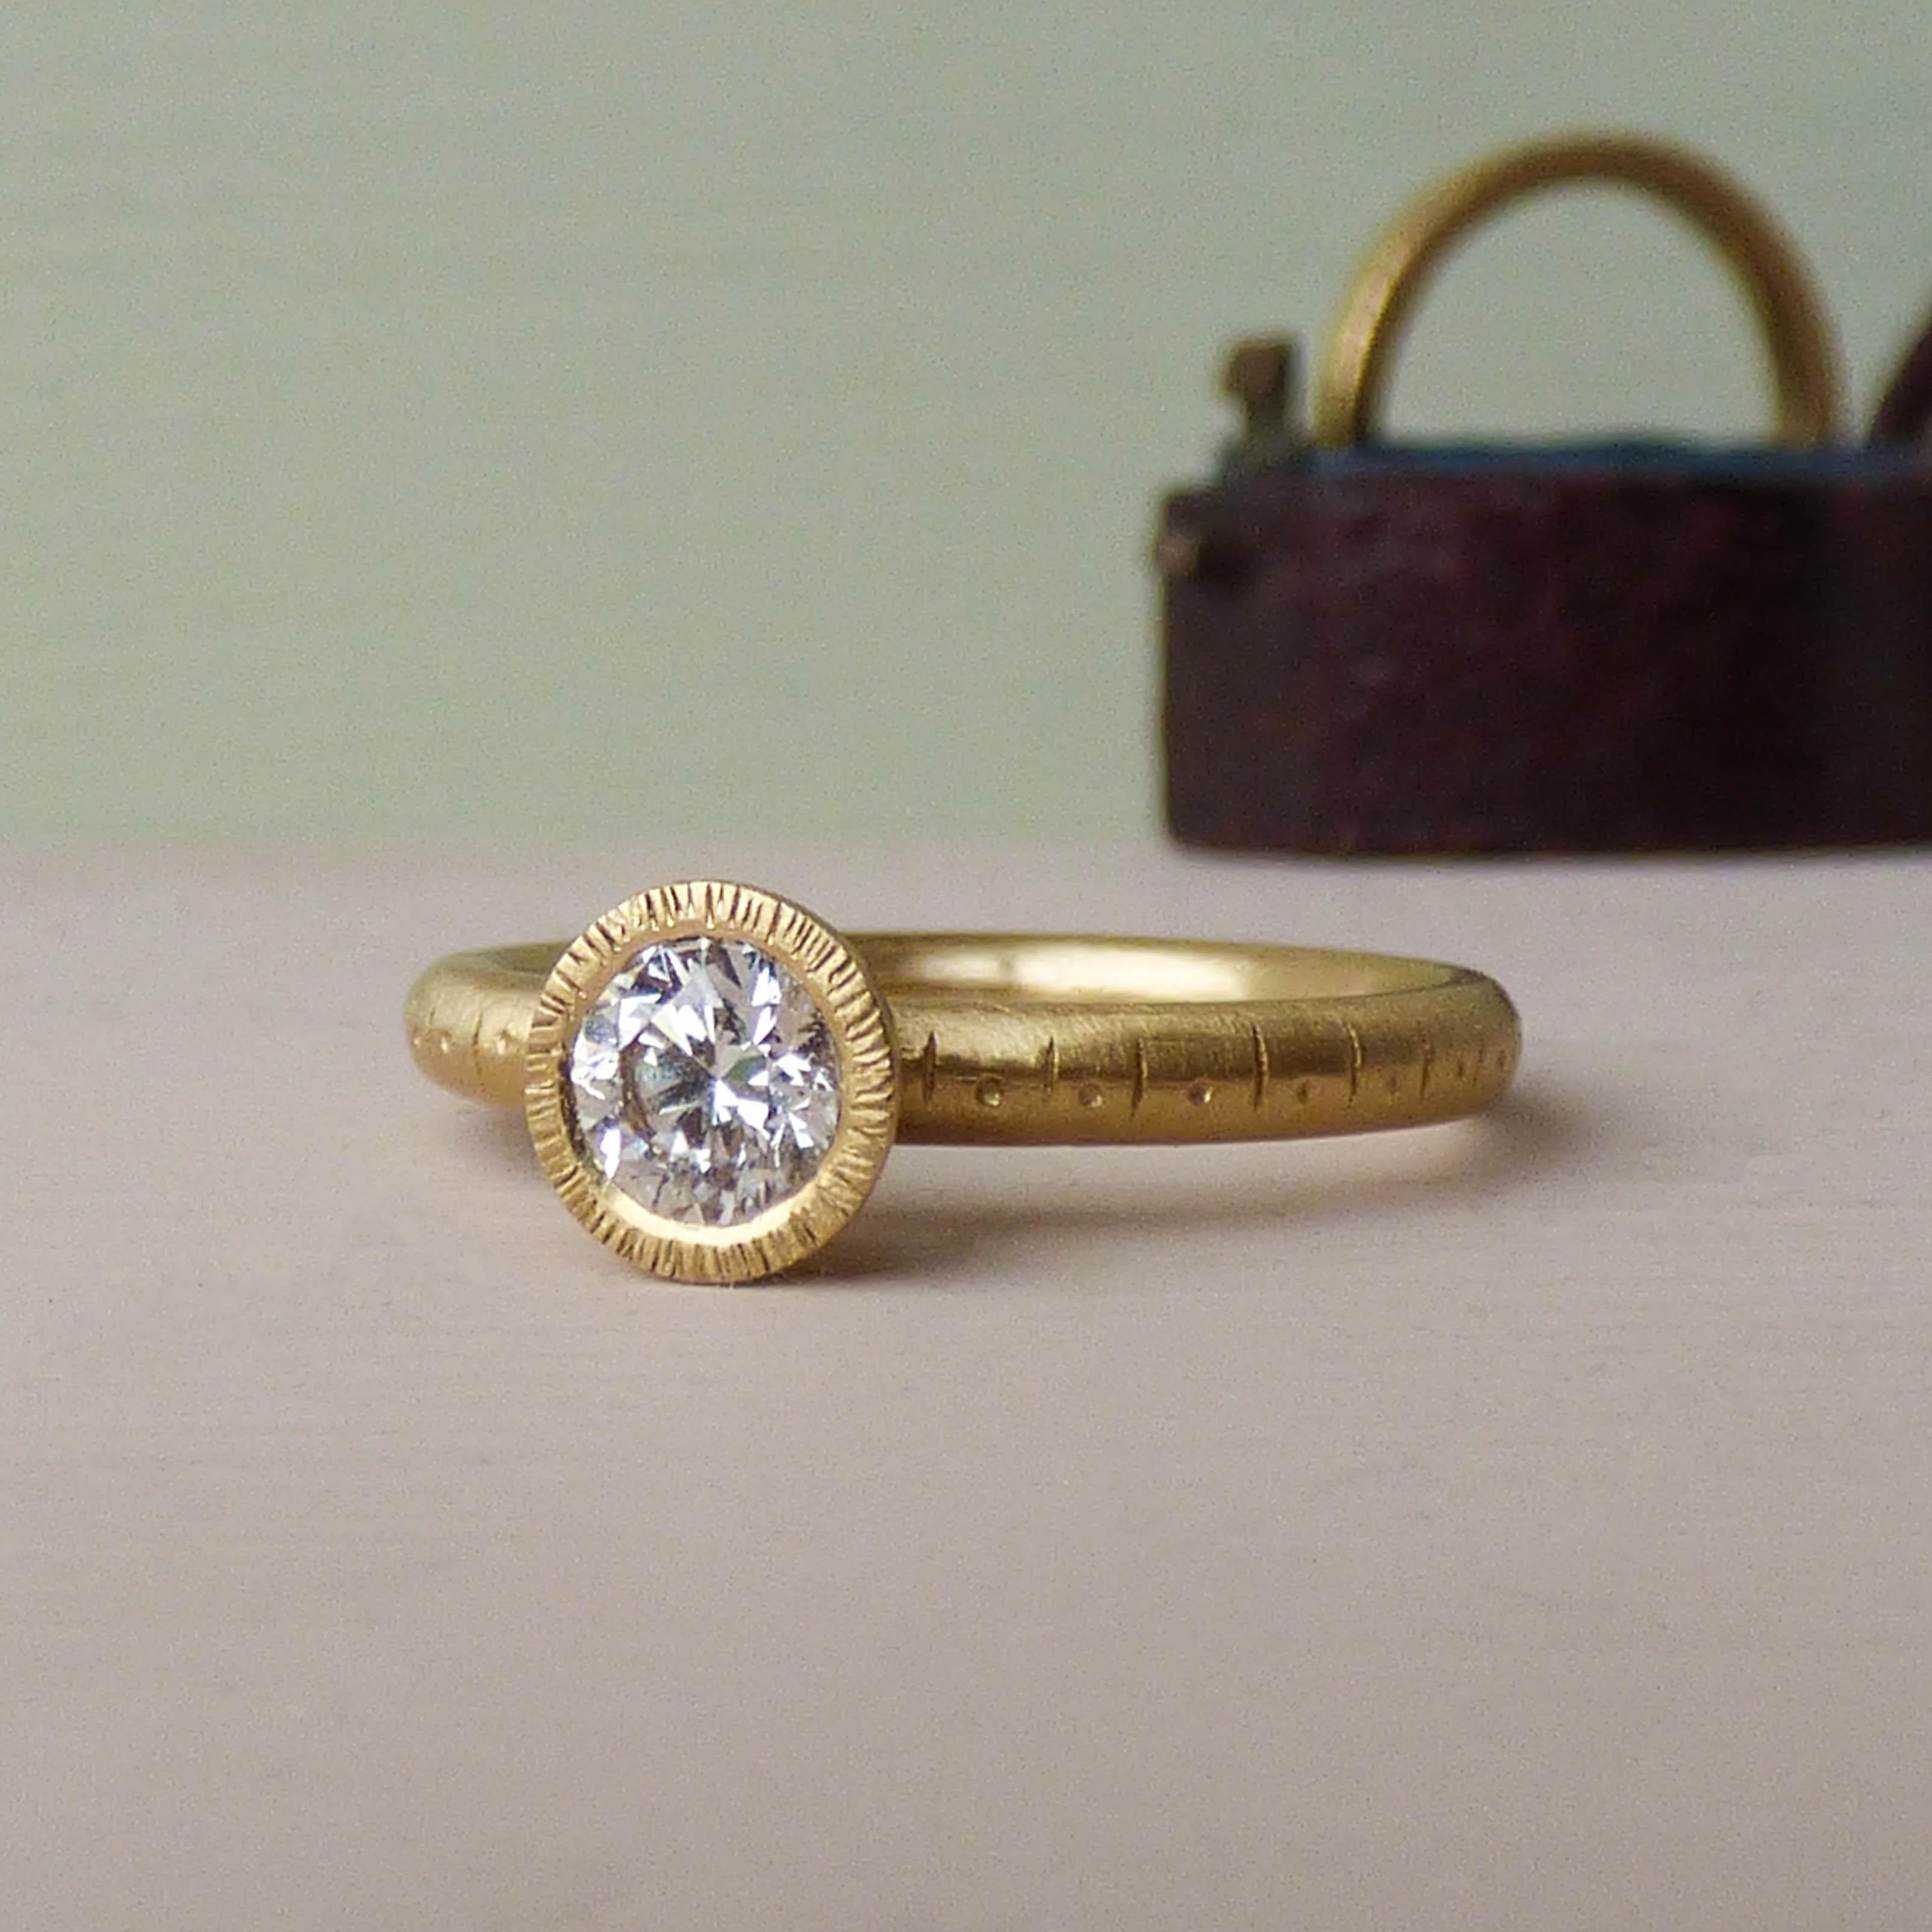 For Sale:  The Callie Ethical Engagement Ring CanadaMark 0.4 carat Diamond 18ct Gold 4